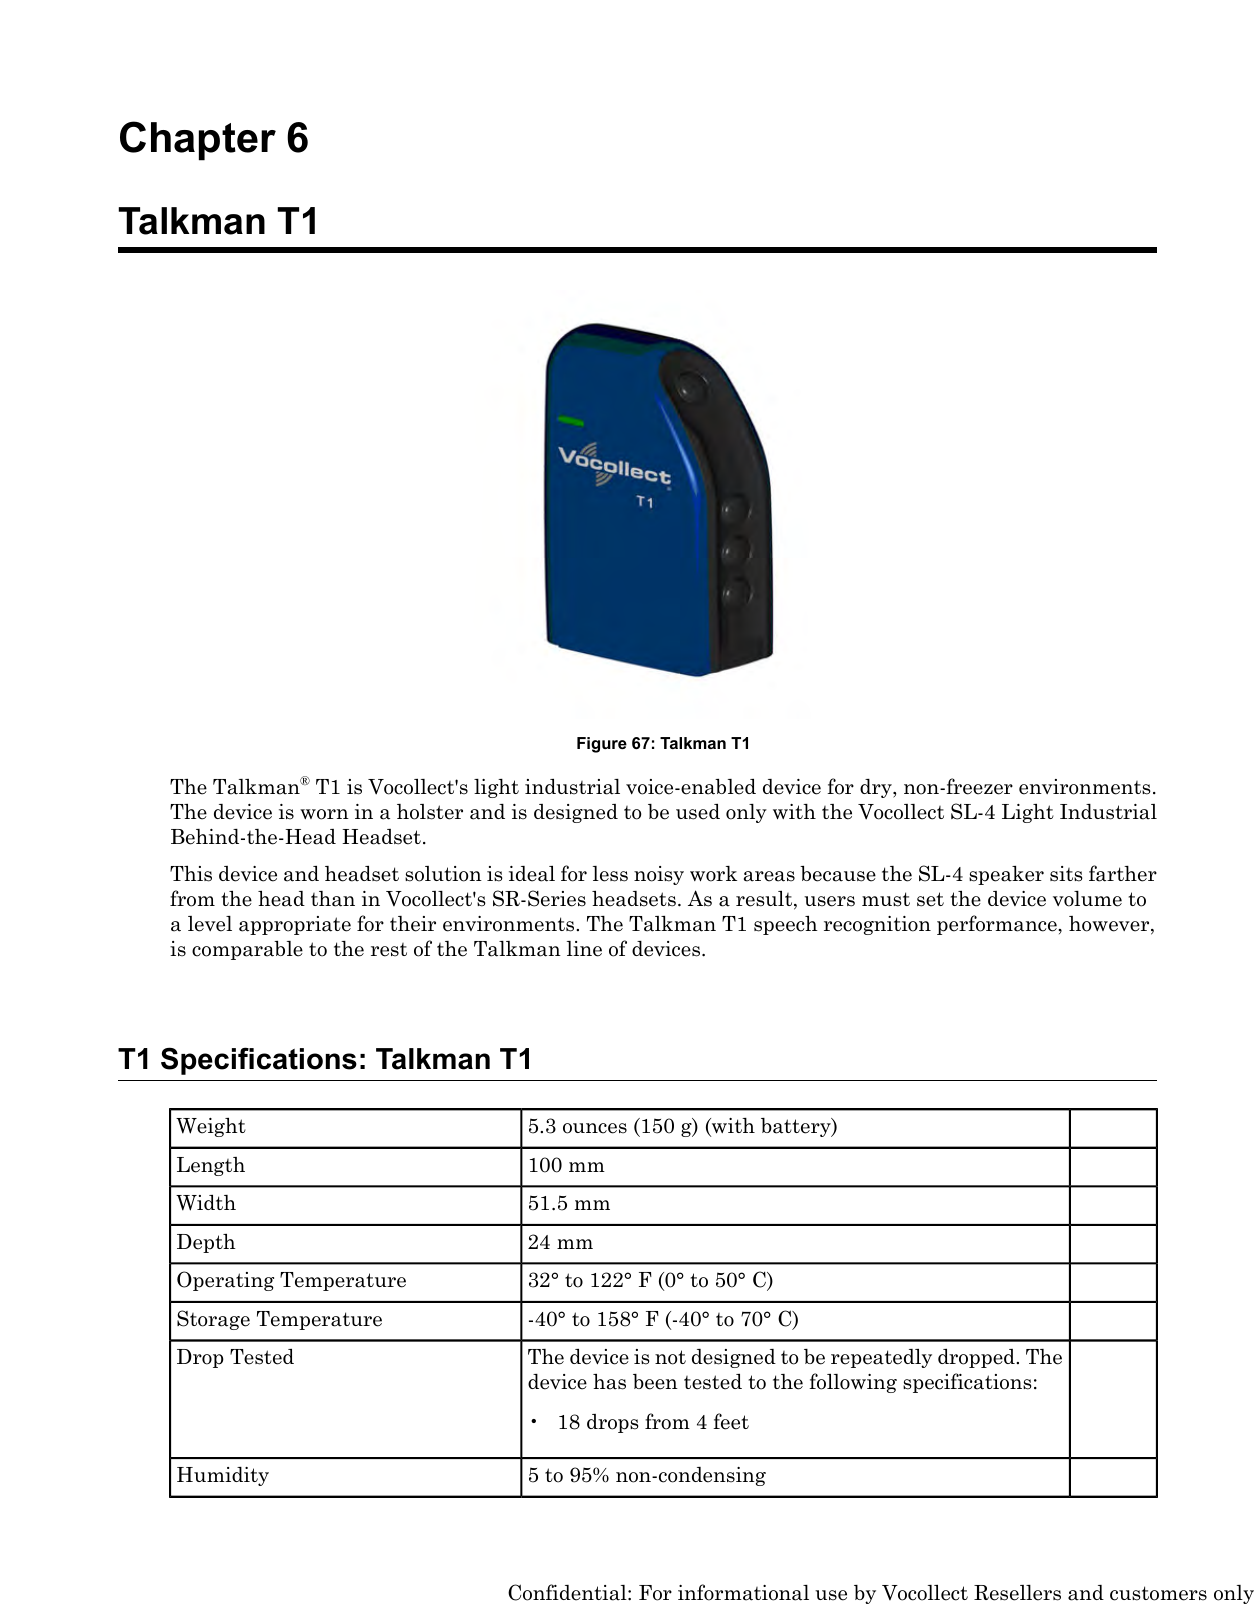 Chapter 6Talkman T1Figure 67: Talkman T1The Talkman®T1 is Vocollect&apos;s light industrial voice-enabled device for dry, non-freezer environments.The device is worn in a holster and is designed to be used only with the Vocollect SL-4 Light IndustrialBehind-the-Head Headset.This device and headset solution is ideal for less noisy work areas because the SL-4 speaker sits fartherfrom the head than in Vocollect&apos;s SR-Series headsets. As a result, users must set the device volume toa level appropriate for their environments. The Talkman T1 speech recognition performance, however,is comparable to the rest of the Talkman line of devices.T1 Specifications: Talkman T15.3 ounces (150 g) (with battery)Weight100 mmLength51.5 mmWidth24 mmDepth32° to 122° F (0° to 50° C)Operating Temperature-40° to 158° F (-40° to 70° C)Storage TemperatureThe device is not designed to be repeatedly dropped. Thedevice has been tested to the following specifications:Drop Tested• 18 drops from 4 feet5 to 95% non-condensingHumidityConfidential: For informational use by Vocollect Resellers and customers only